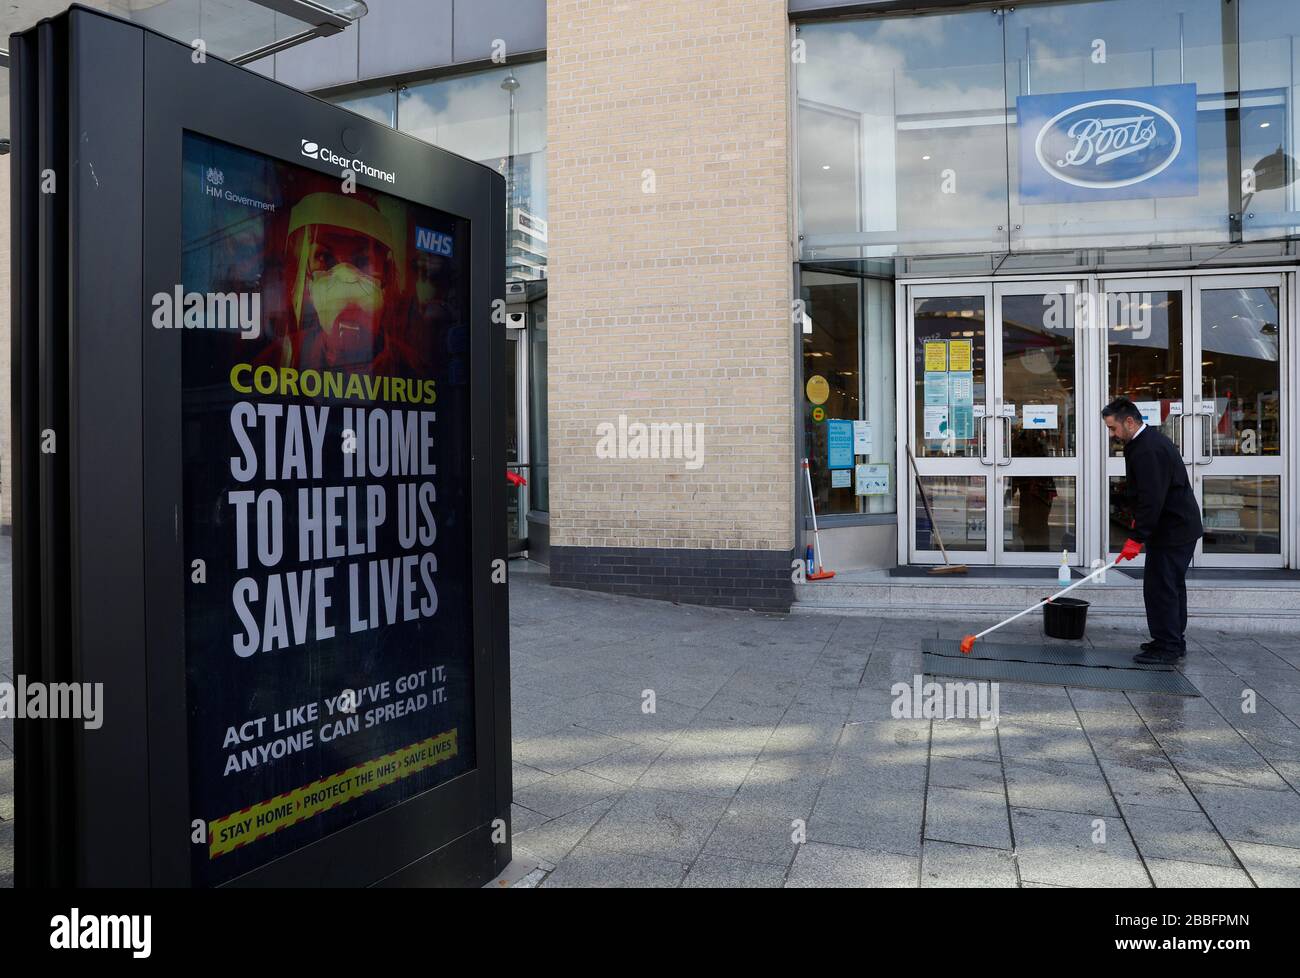 Birmingham, West Midlands, UK. 31st March 2020. A worker cleans the steps  of a Boots chemist in front of a NHS advert in Birmingham city centre  during the Coronavirus pandemic lockdown. Credit